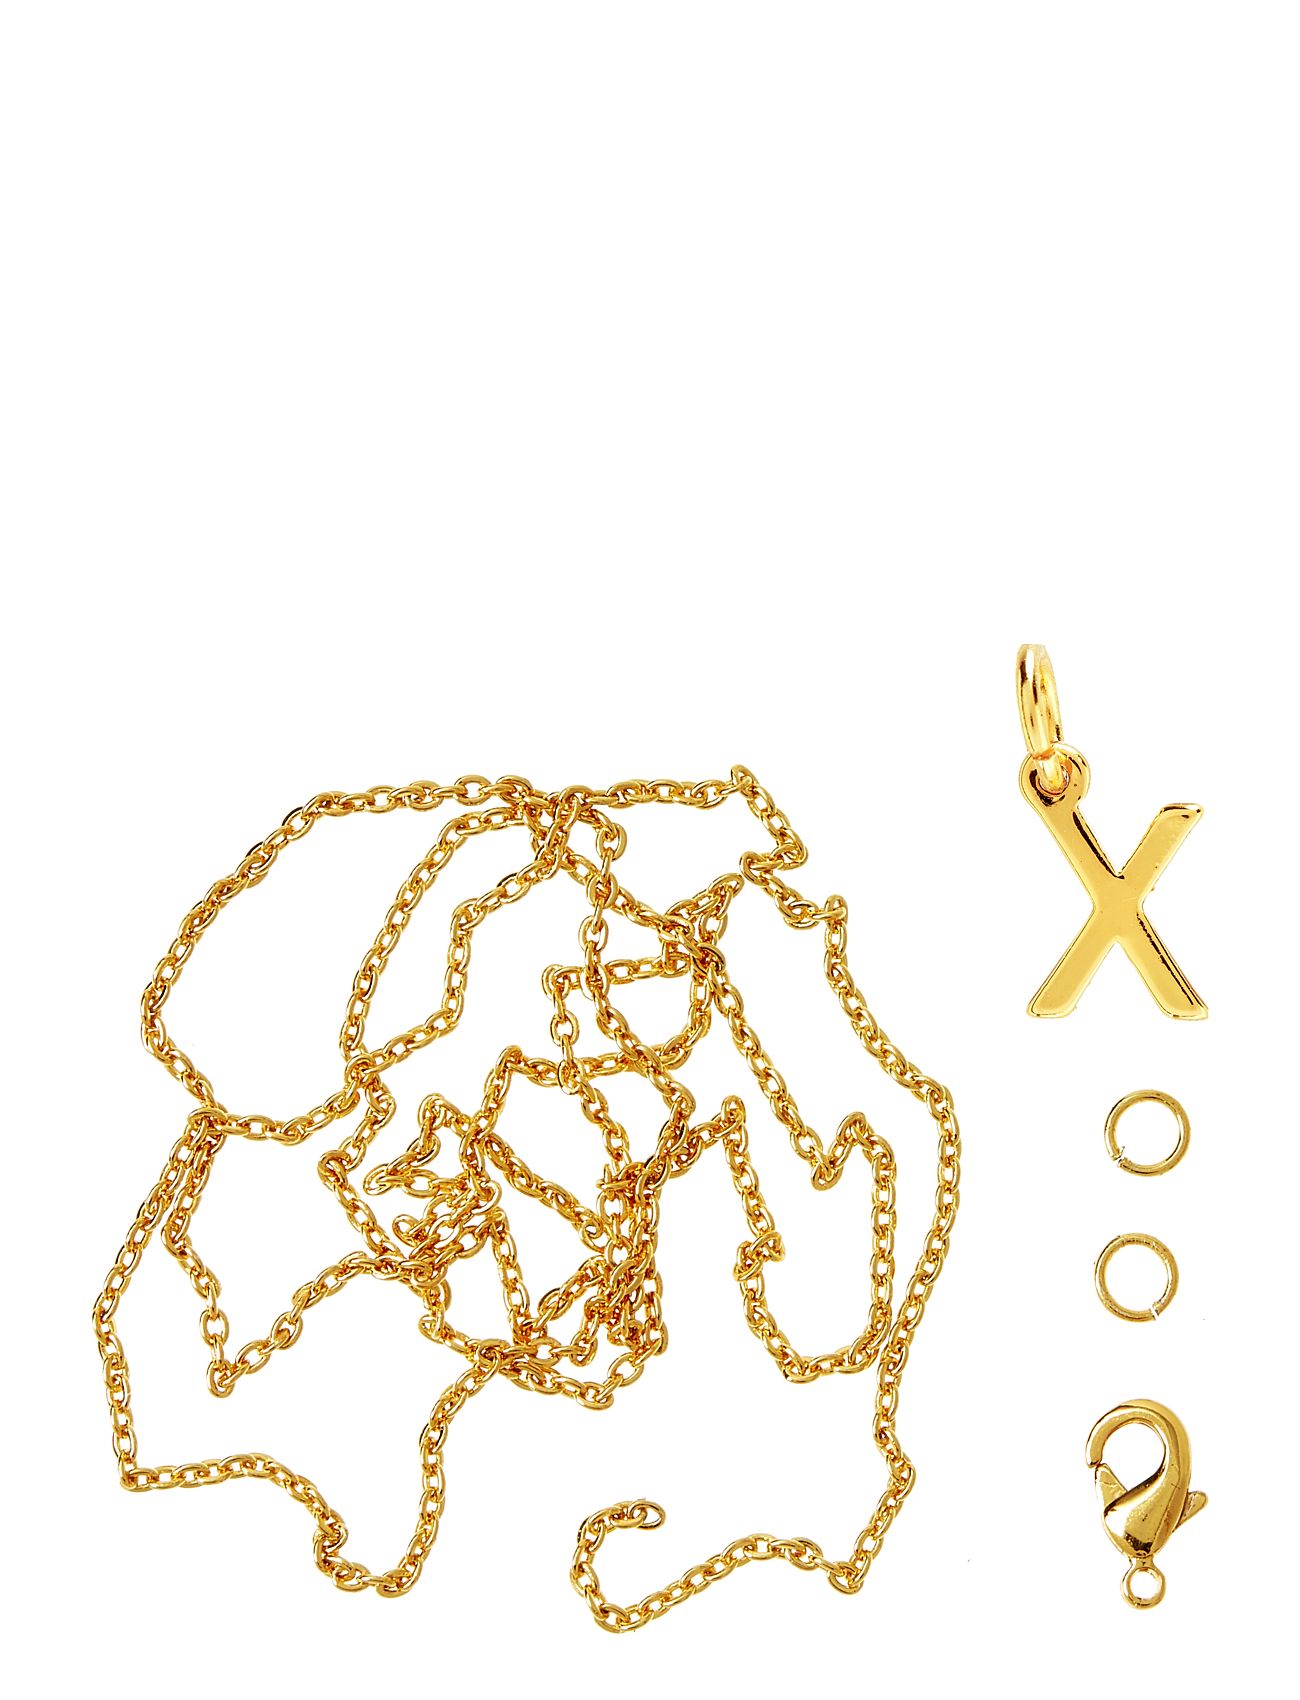 Letter X Gp With O-Ring, Chain And Clasp Toys Creativity Drawing & Crafts Craft Jewellery & Accessories Gold Me & My Box